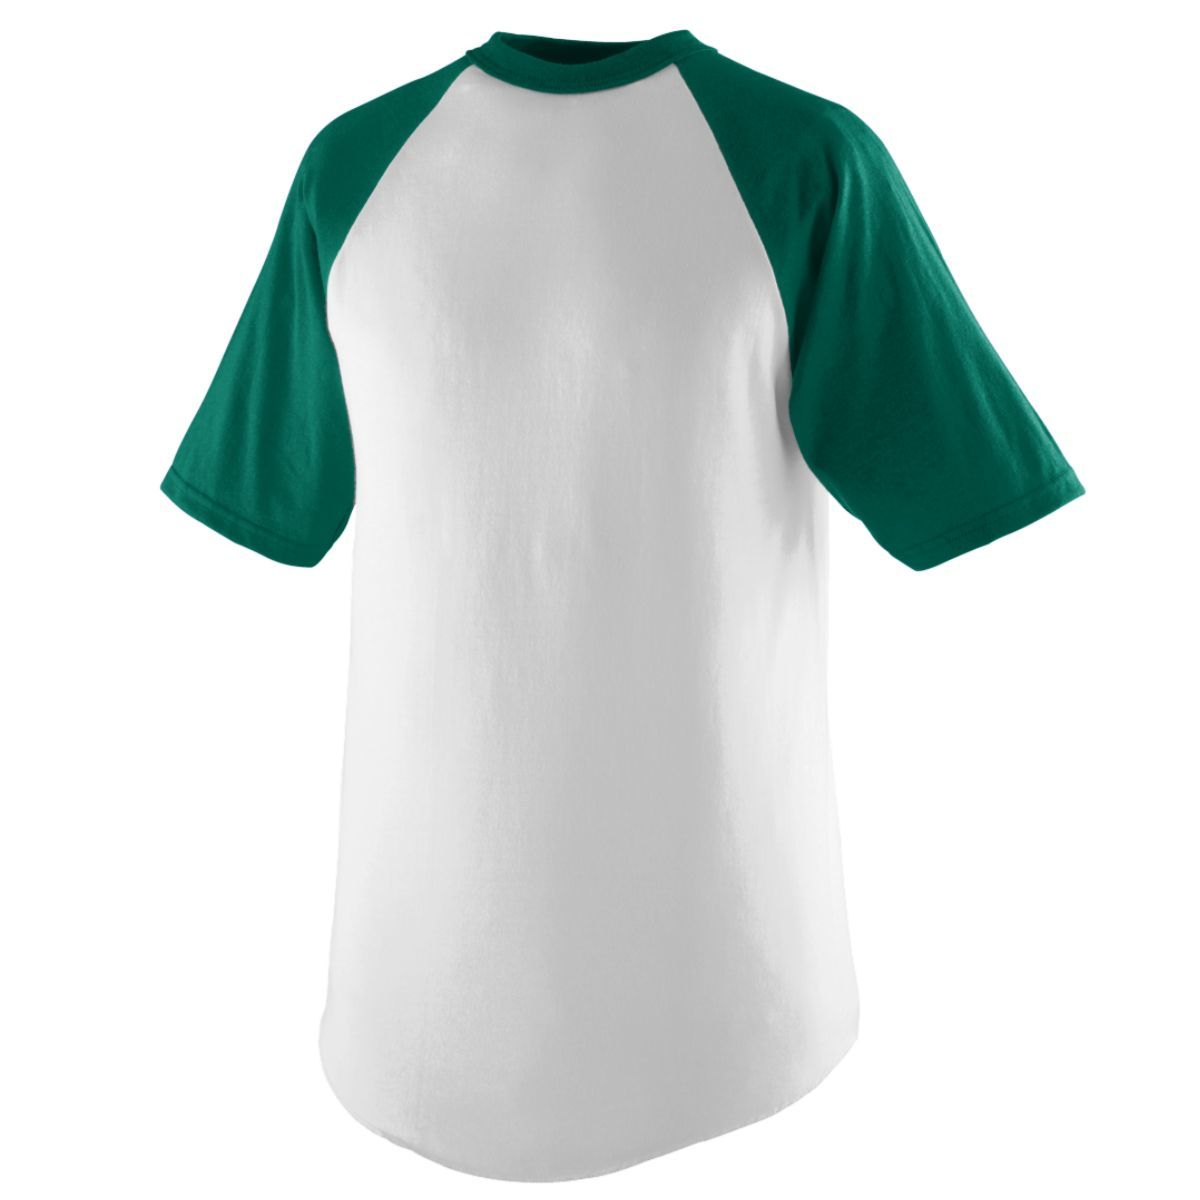 Augusta Sportswear Youth Short Sleeve Baseball Jersey in White/Dark Green  -Part of the Youth, Youth-Jersey, Augusta-Products, Baseball, Shirts, All-Sports, All-Sports-1 product lines at KanaleyCreations.com